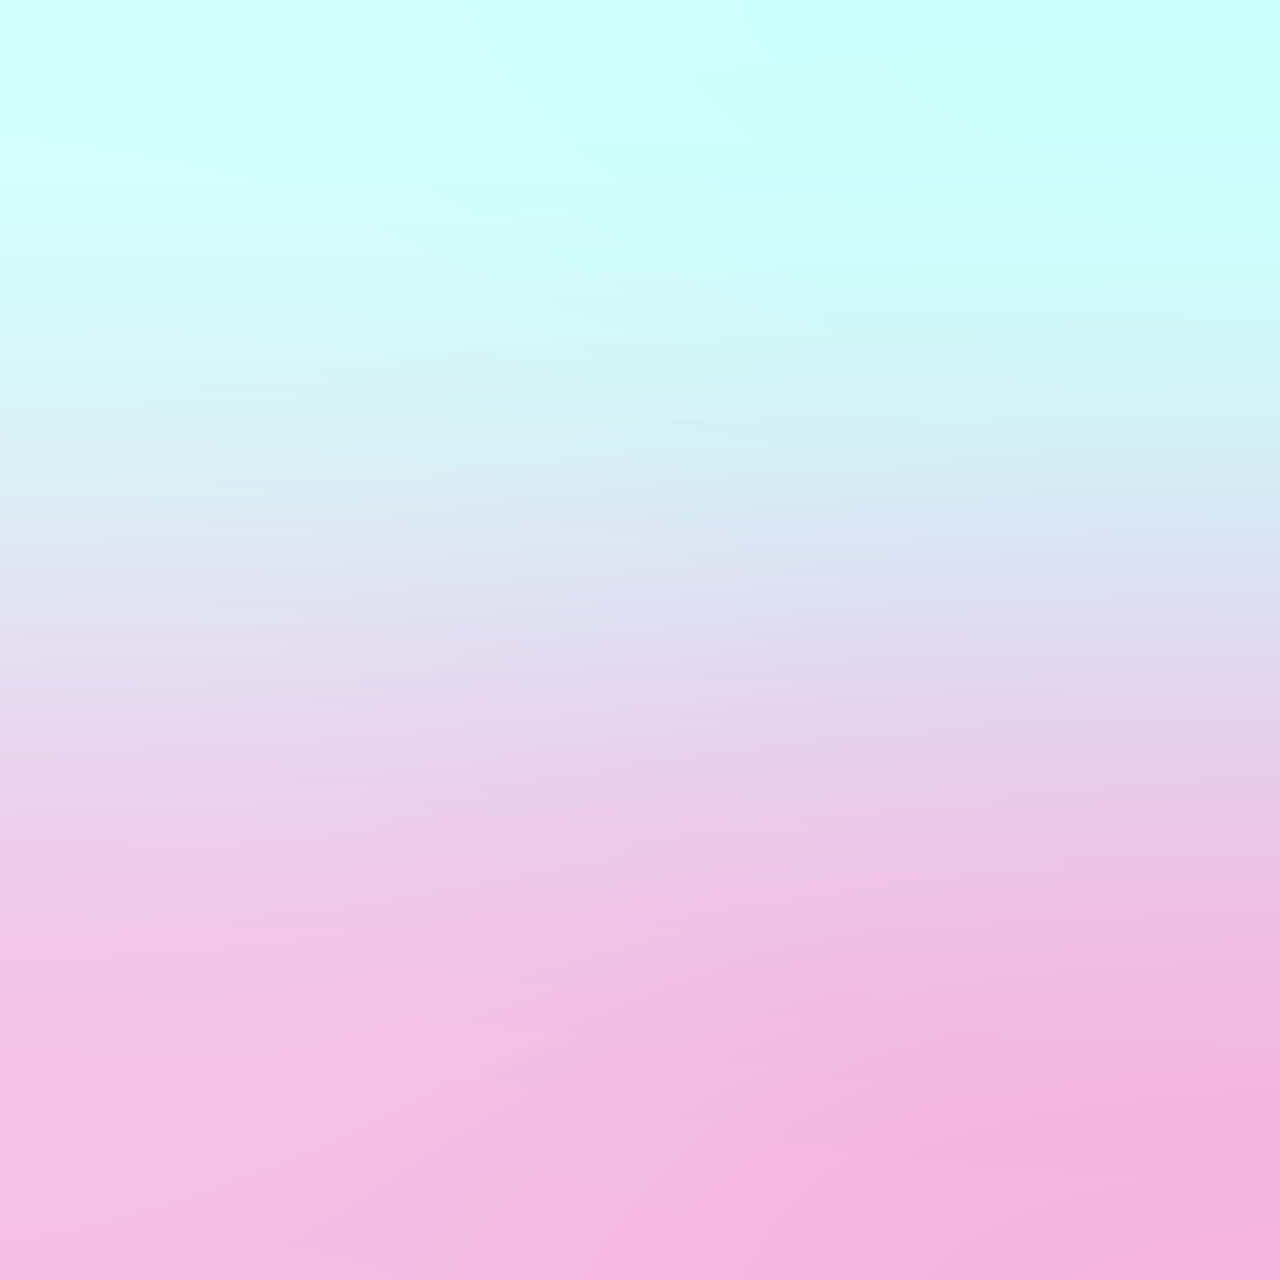 A Pink And Blue Gradient Background